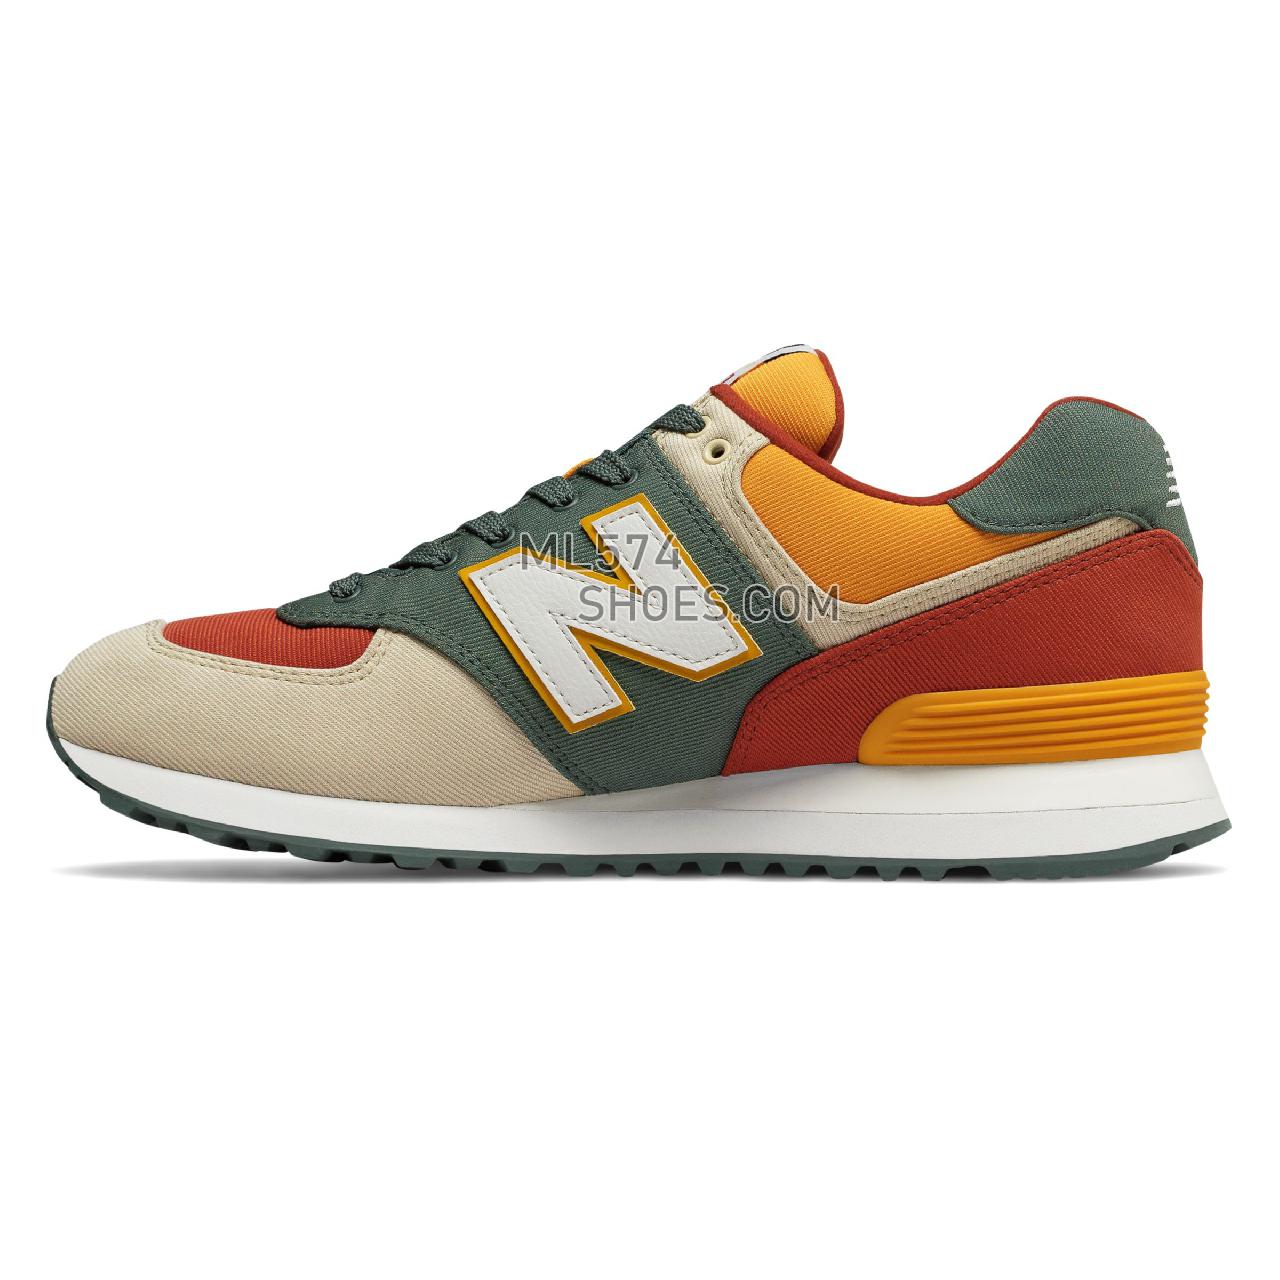 New Balance 574 - Men's 574 - Classic Faded Rosin with Vintage Russet - ML574IND